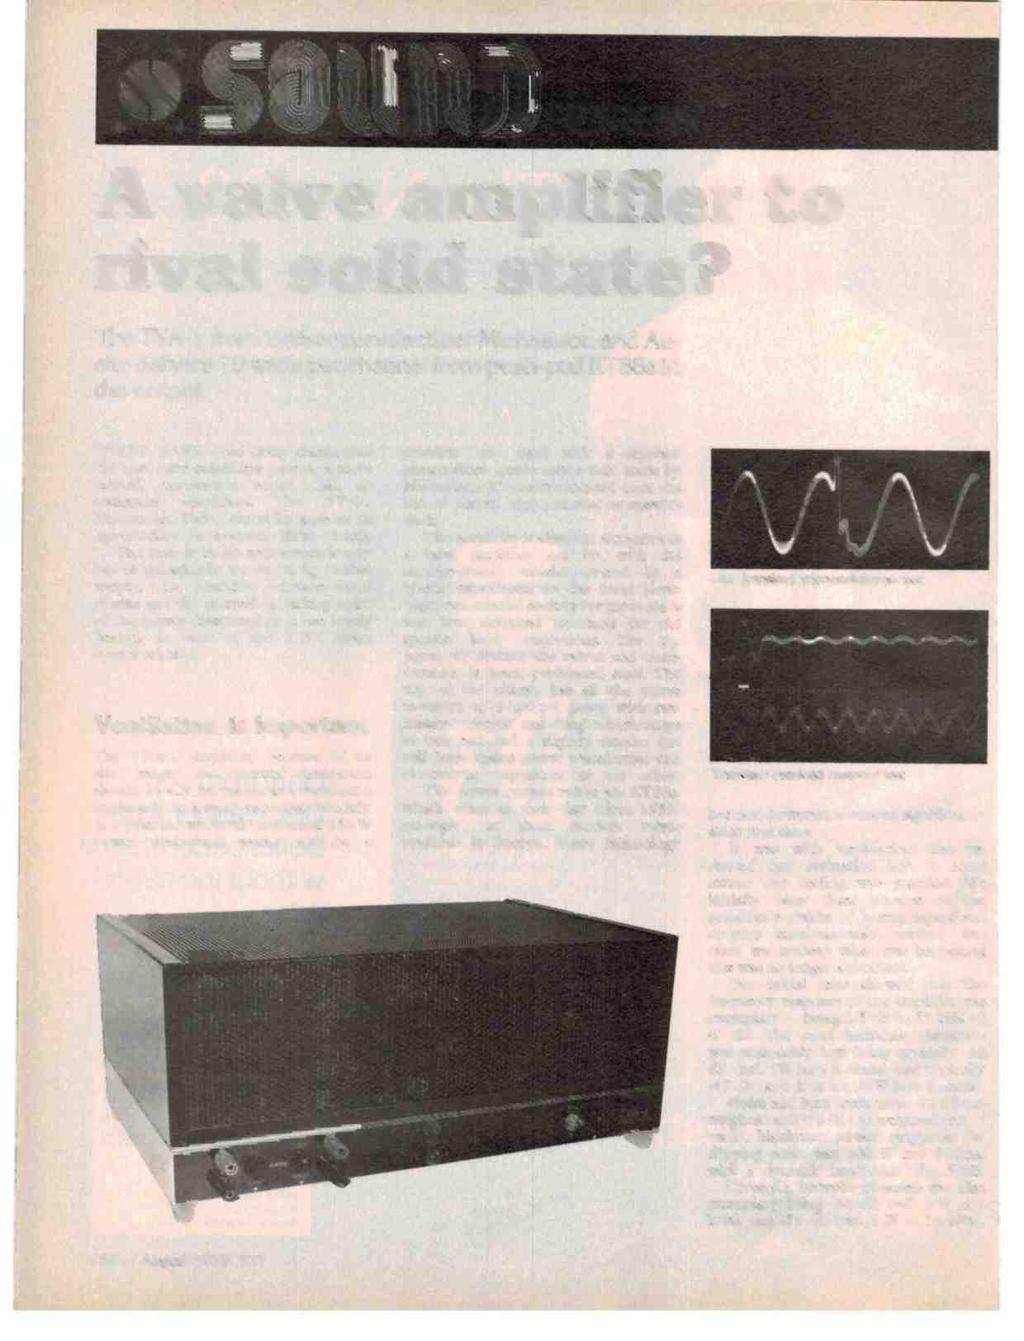 .. ate rival solid 132sprtetiewe; The TVA -1 from British manufacturer Michaelson and Austin delivers 70 watts per channel from push-pull KT88s in the output.